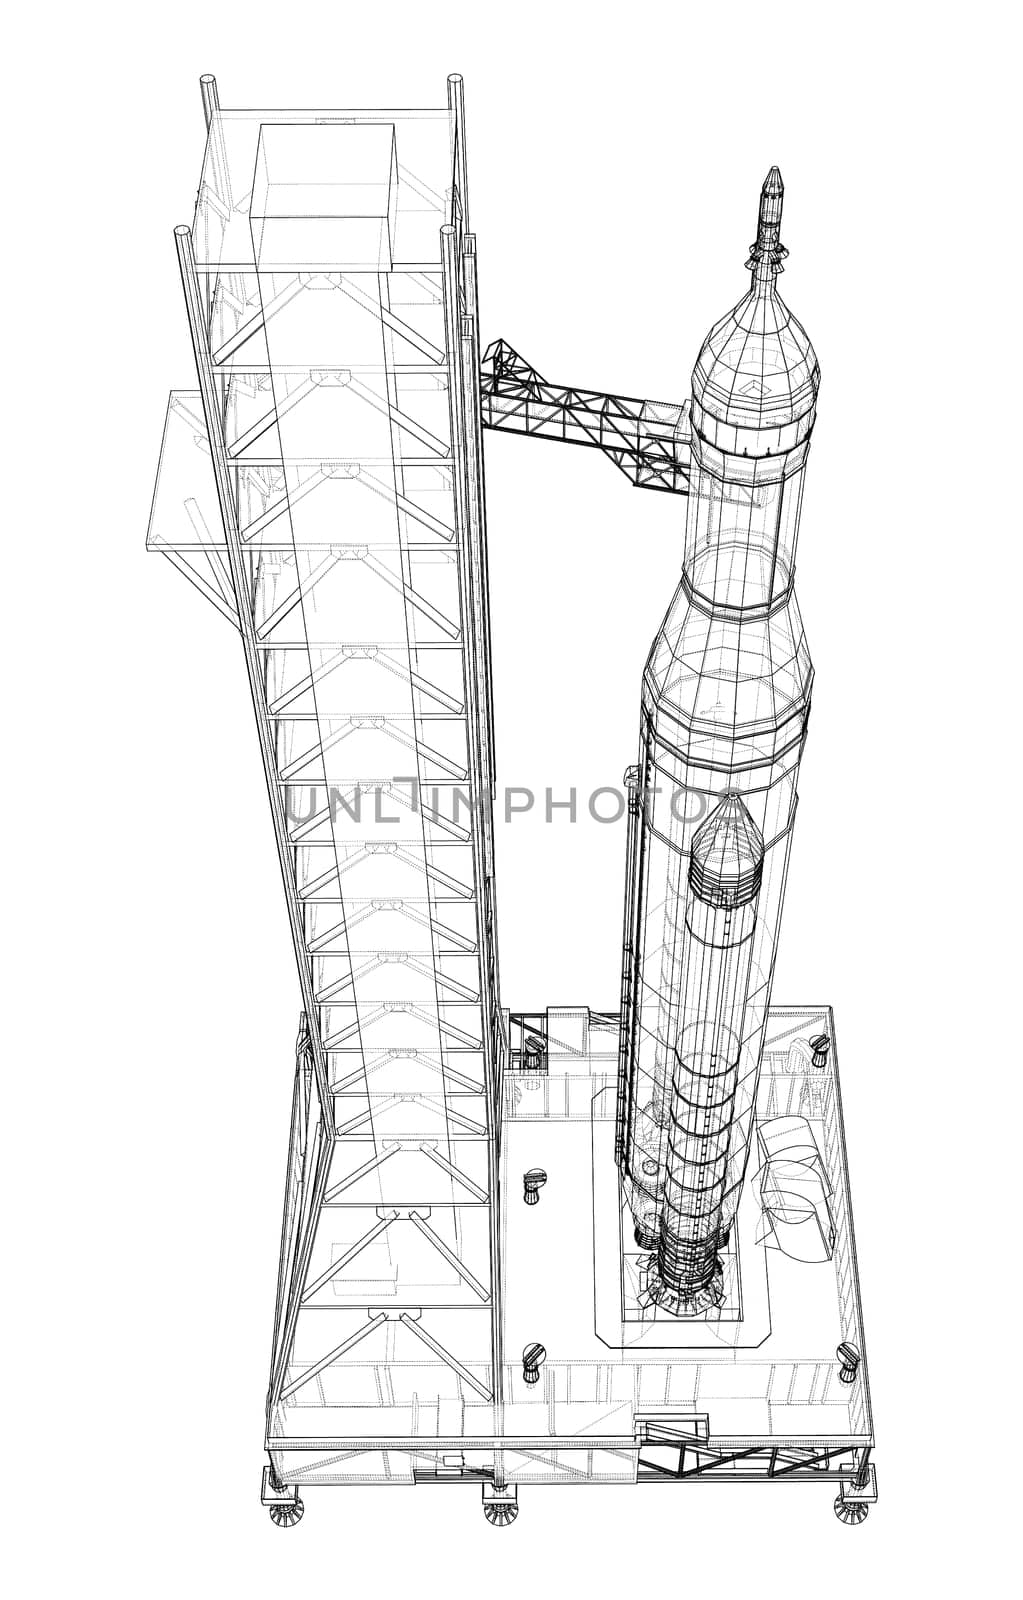 Space Rocket on launch pad by cherezoff